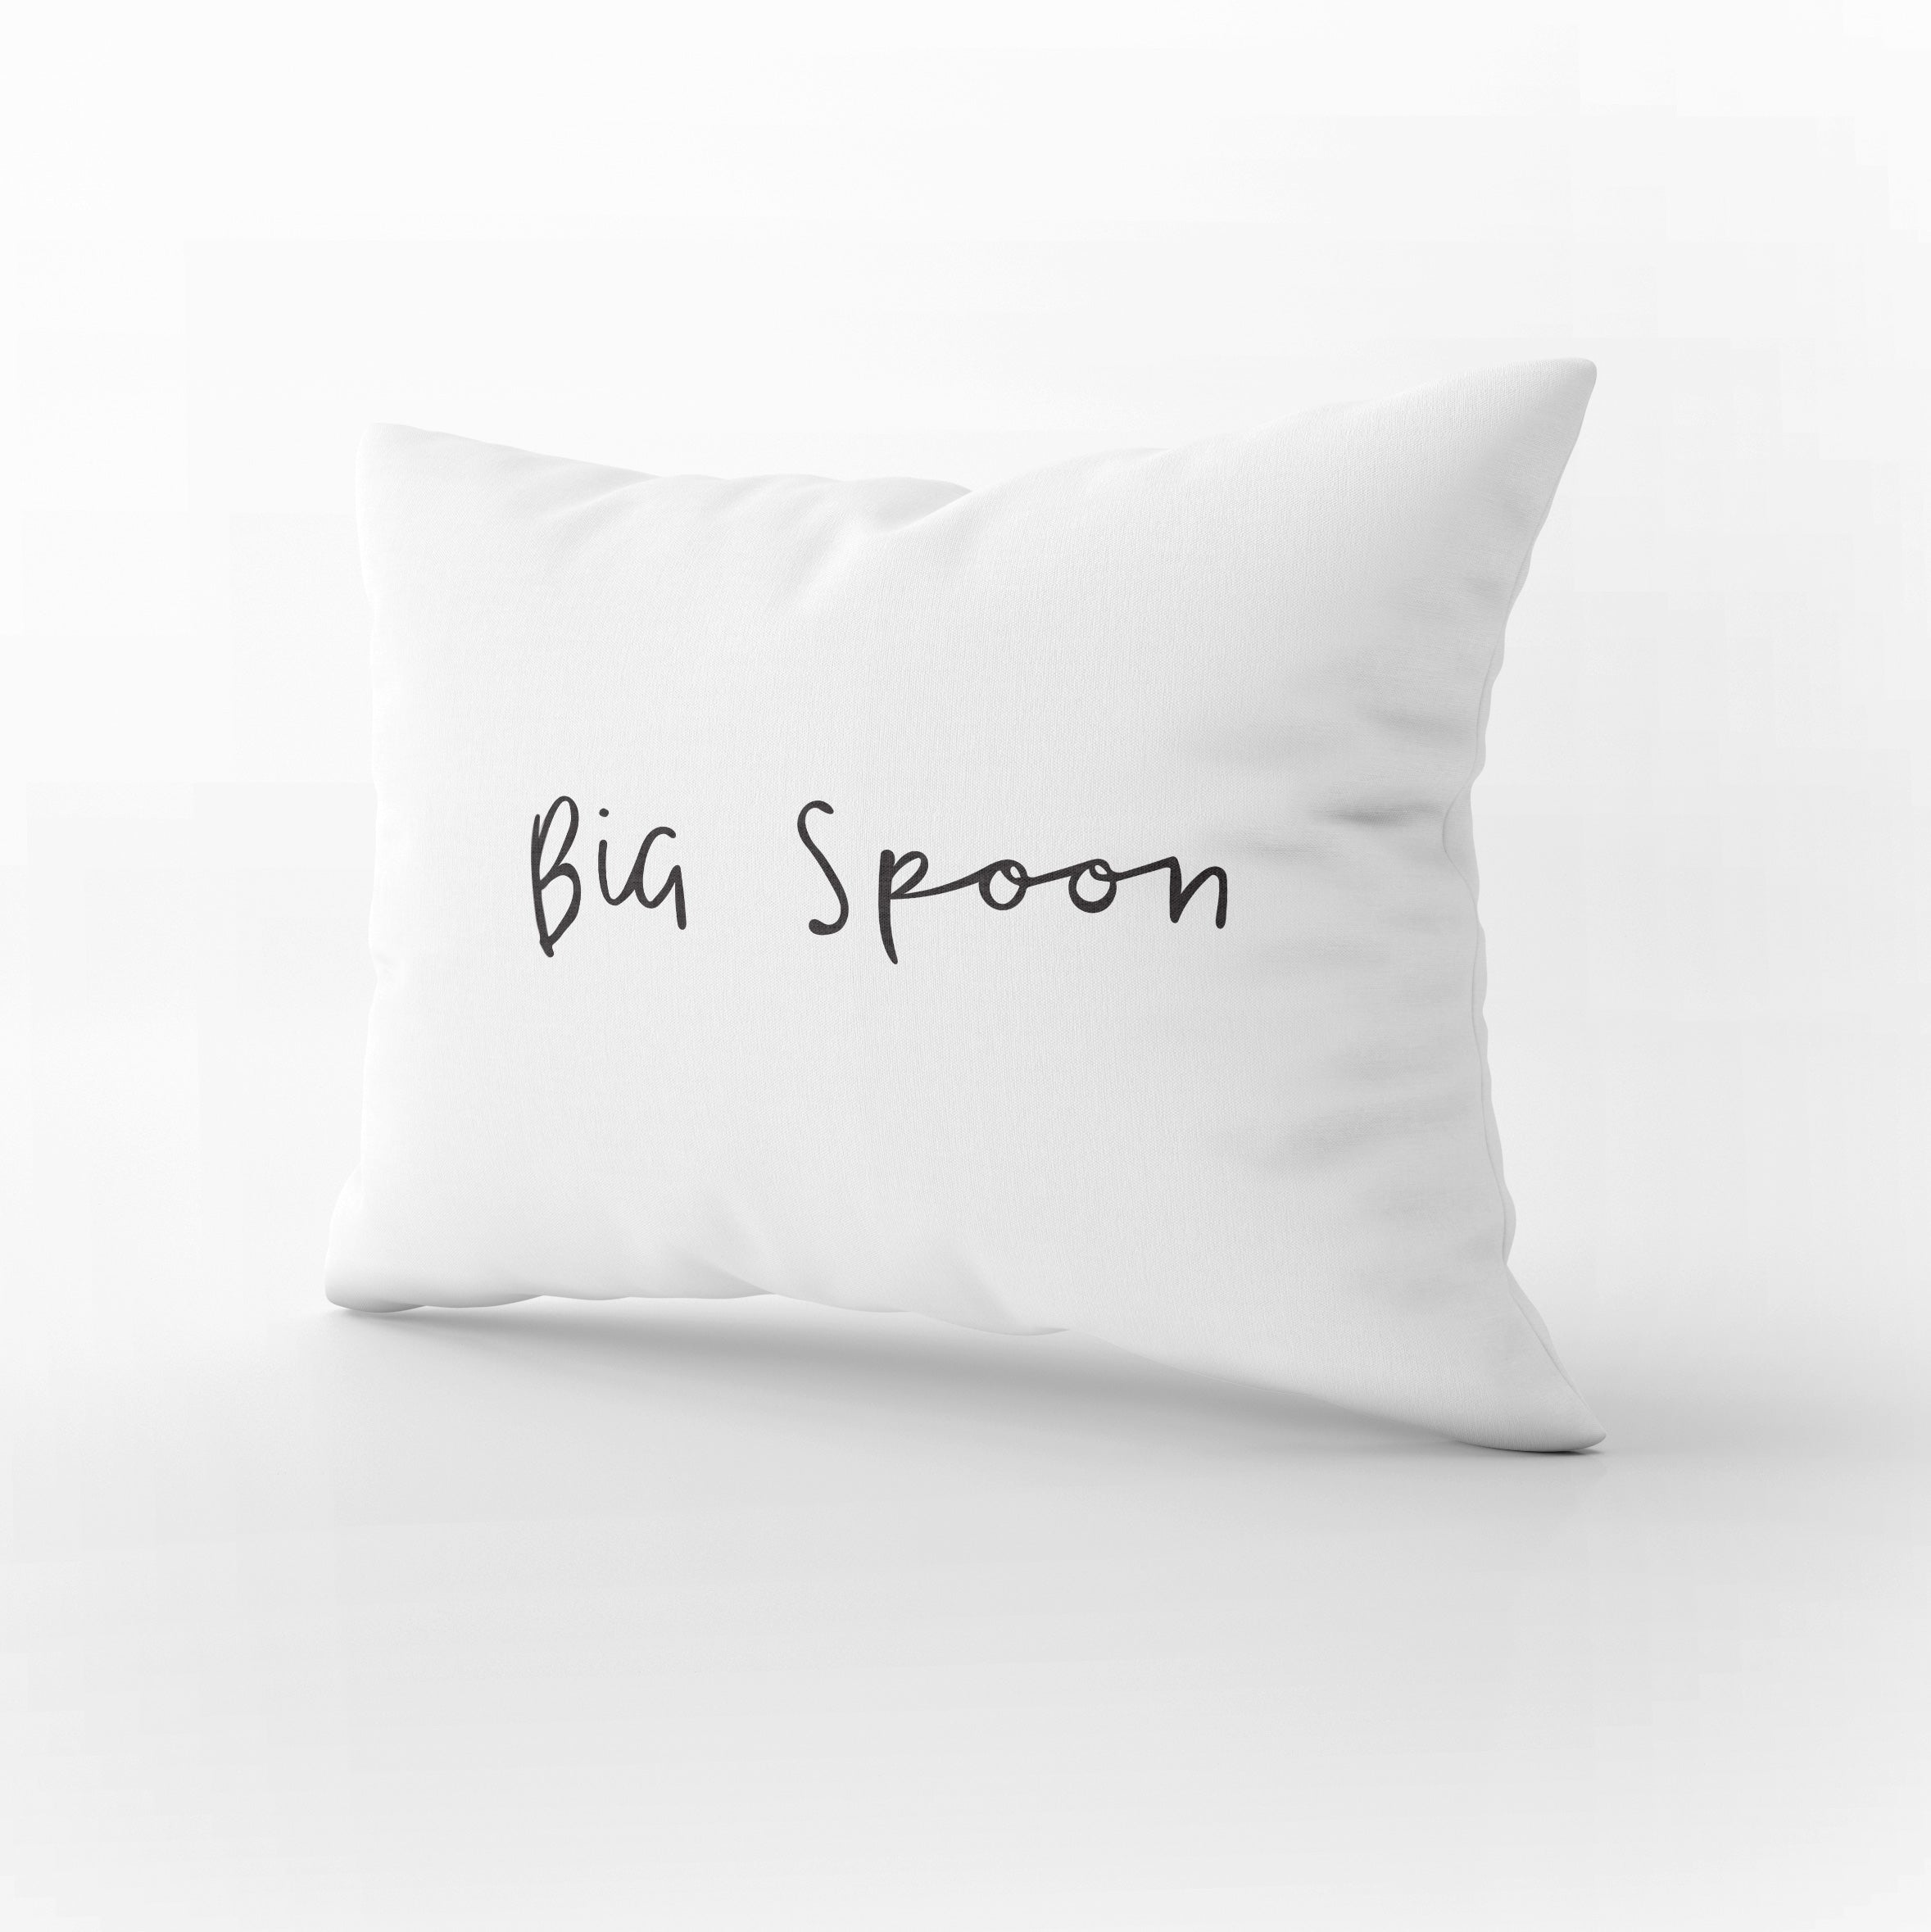 PS03- BIG SPOON &amp; LITTLE SPOON PILLOW CASES - Shawshank Clothing 